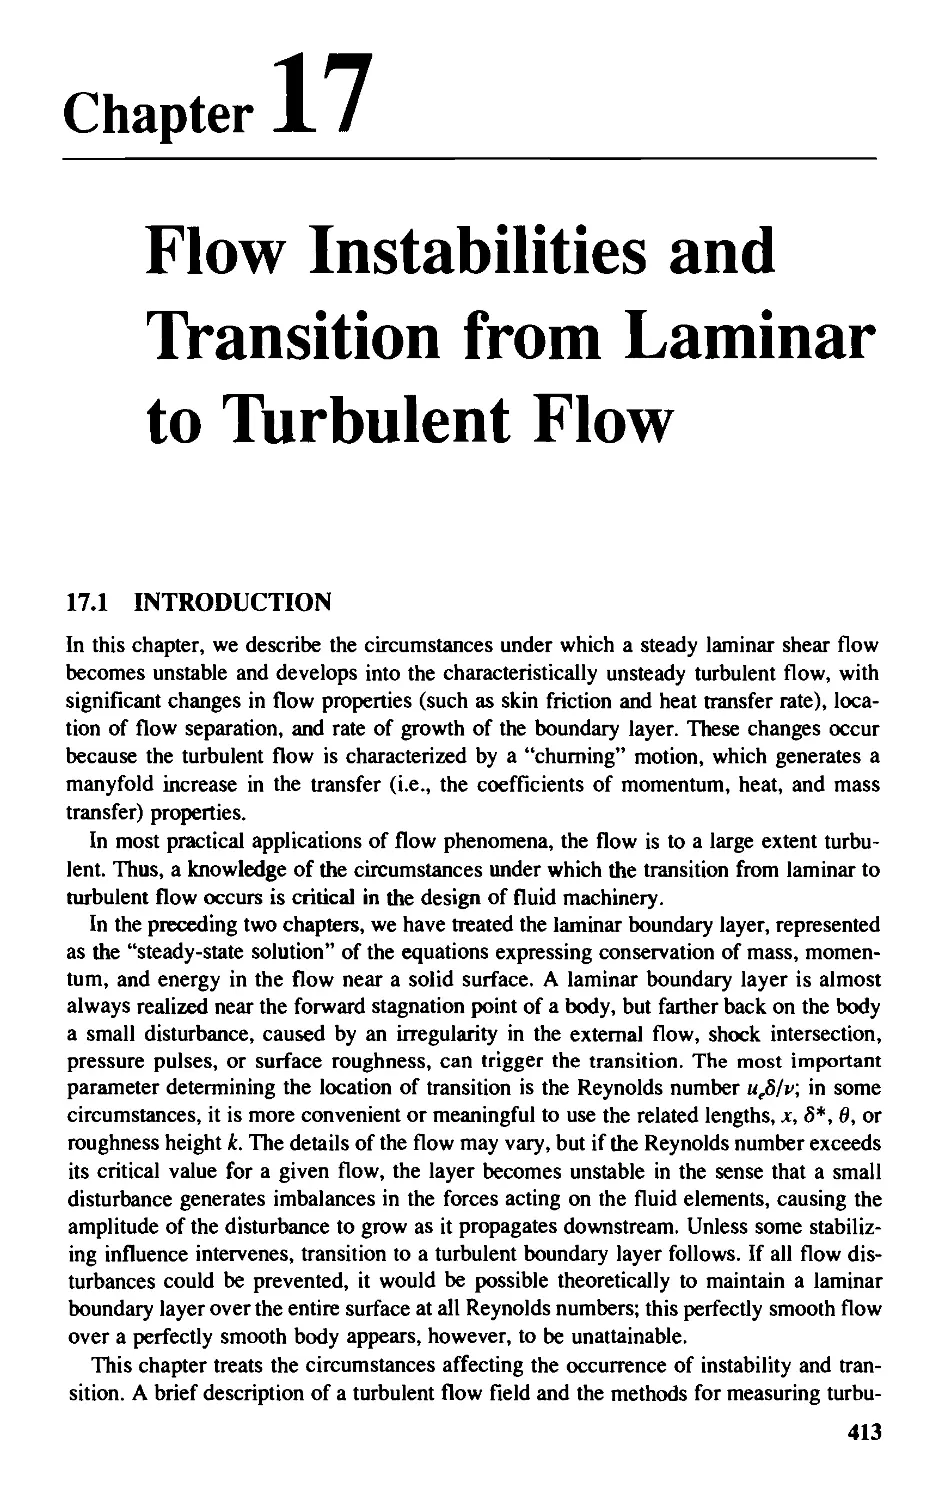 Chapter 17 - Flow Instabilities and Transition from Laminar to Turbulent Flow